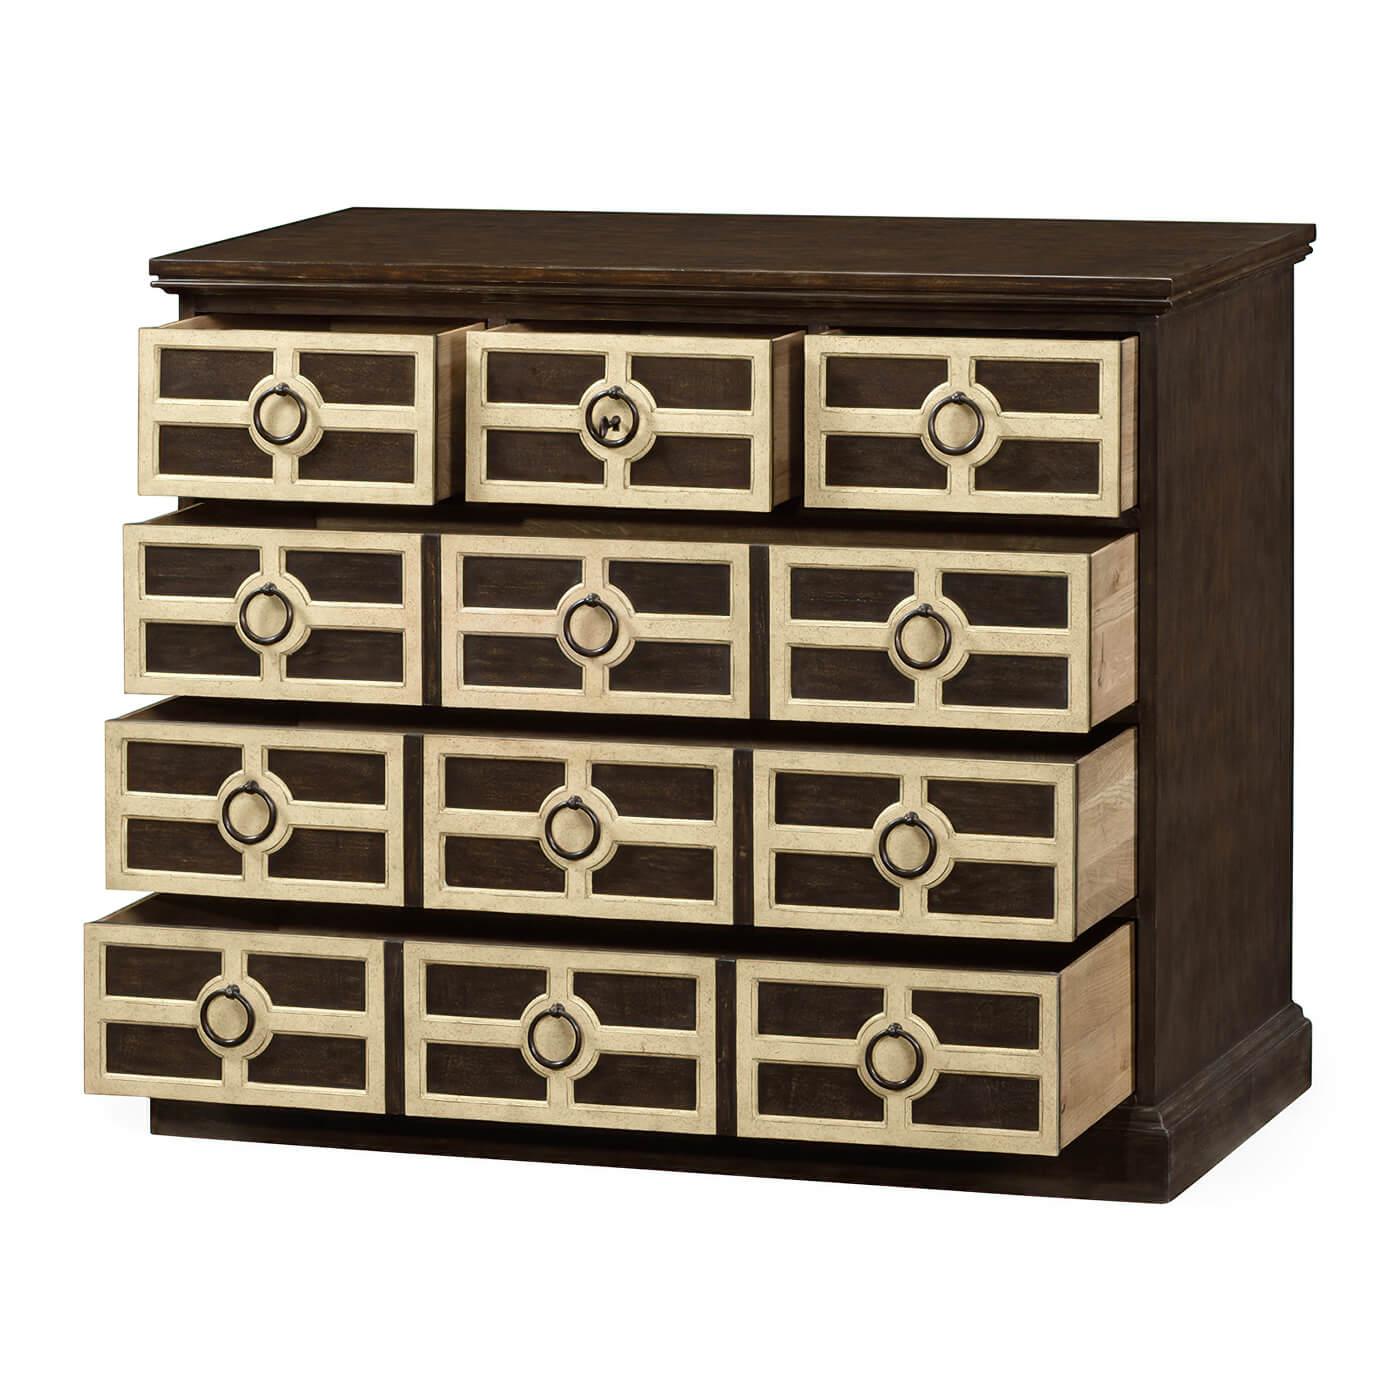 European Moroccan Chest of Drawers